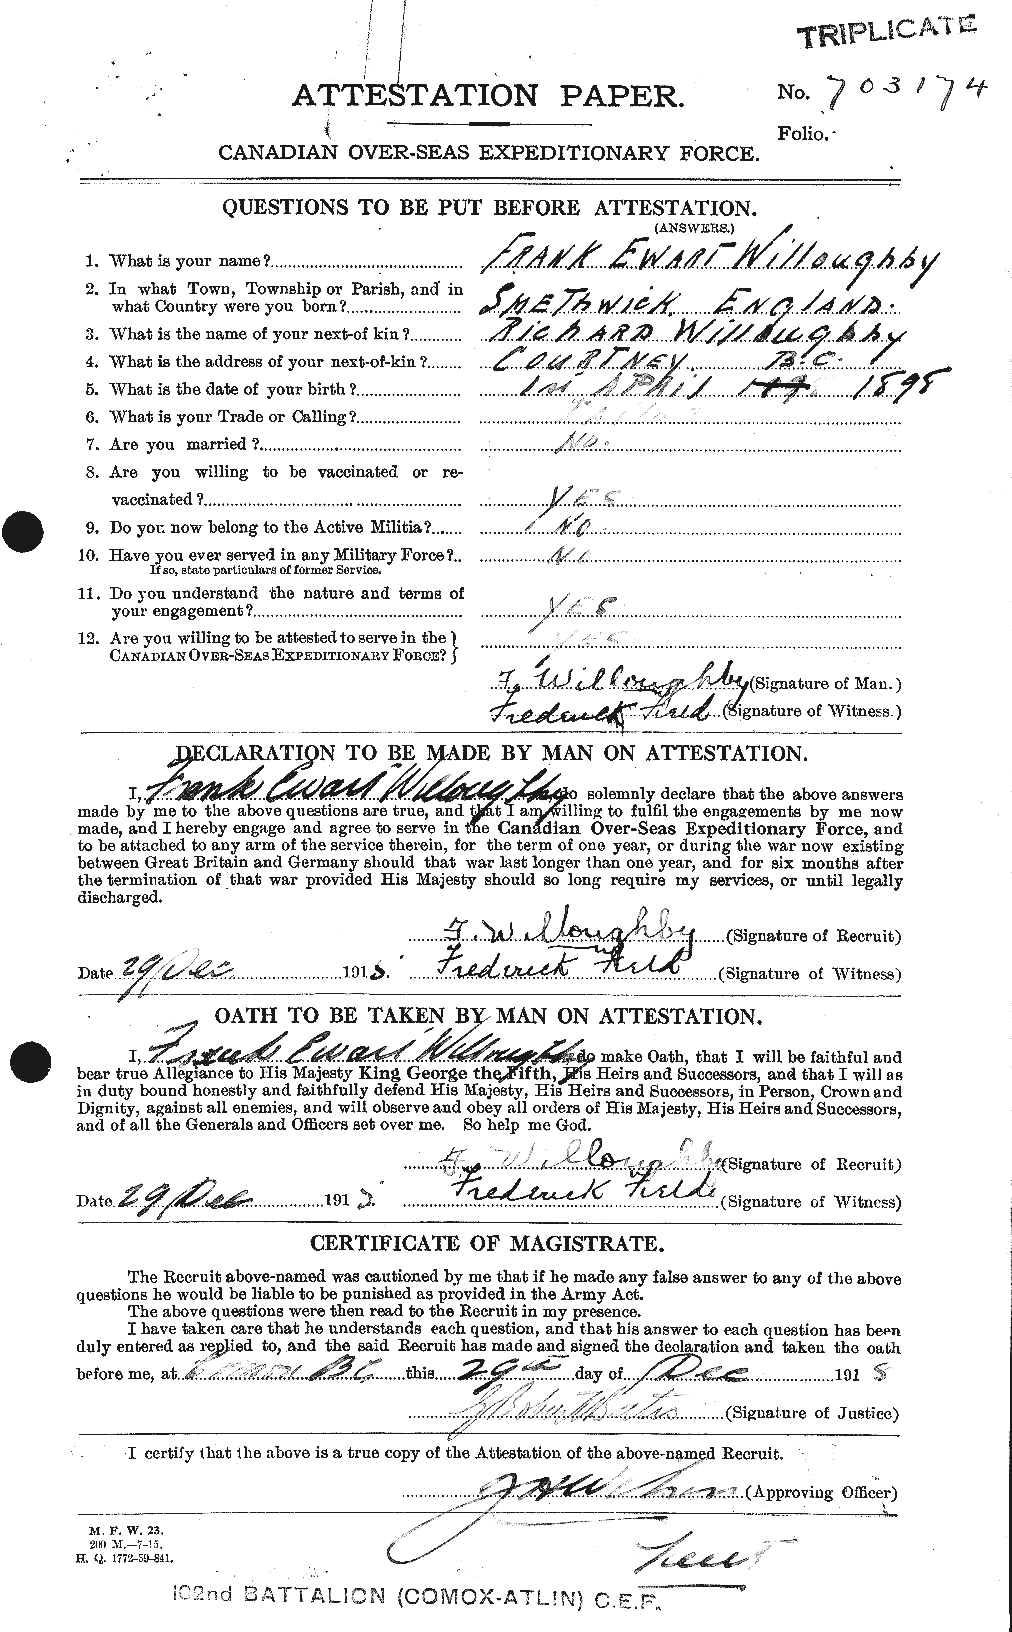 Personnel Records of the First World War - CEF 678280a